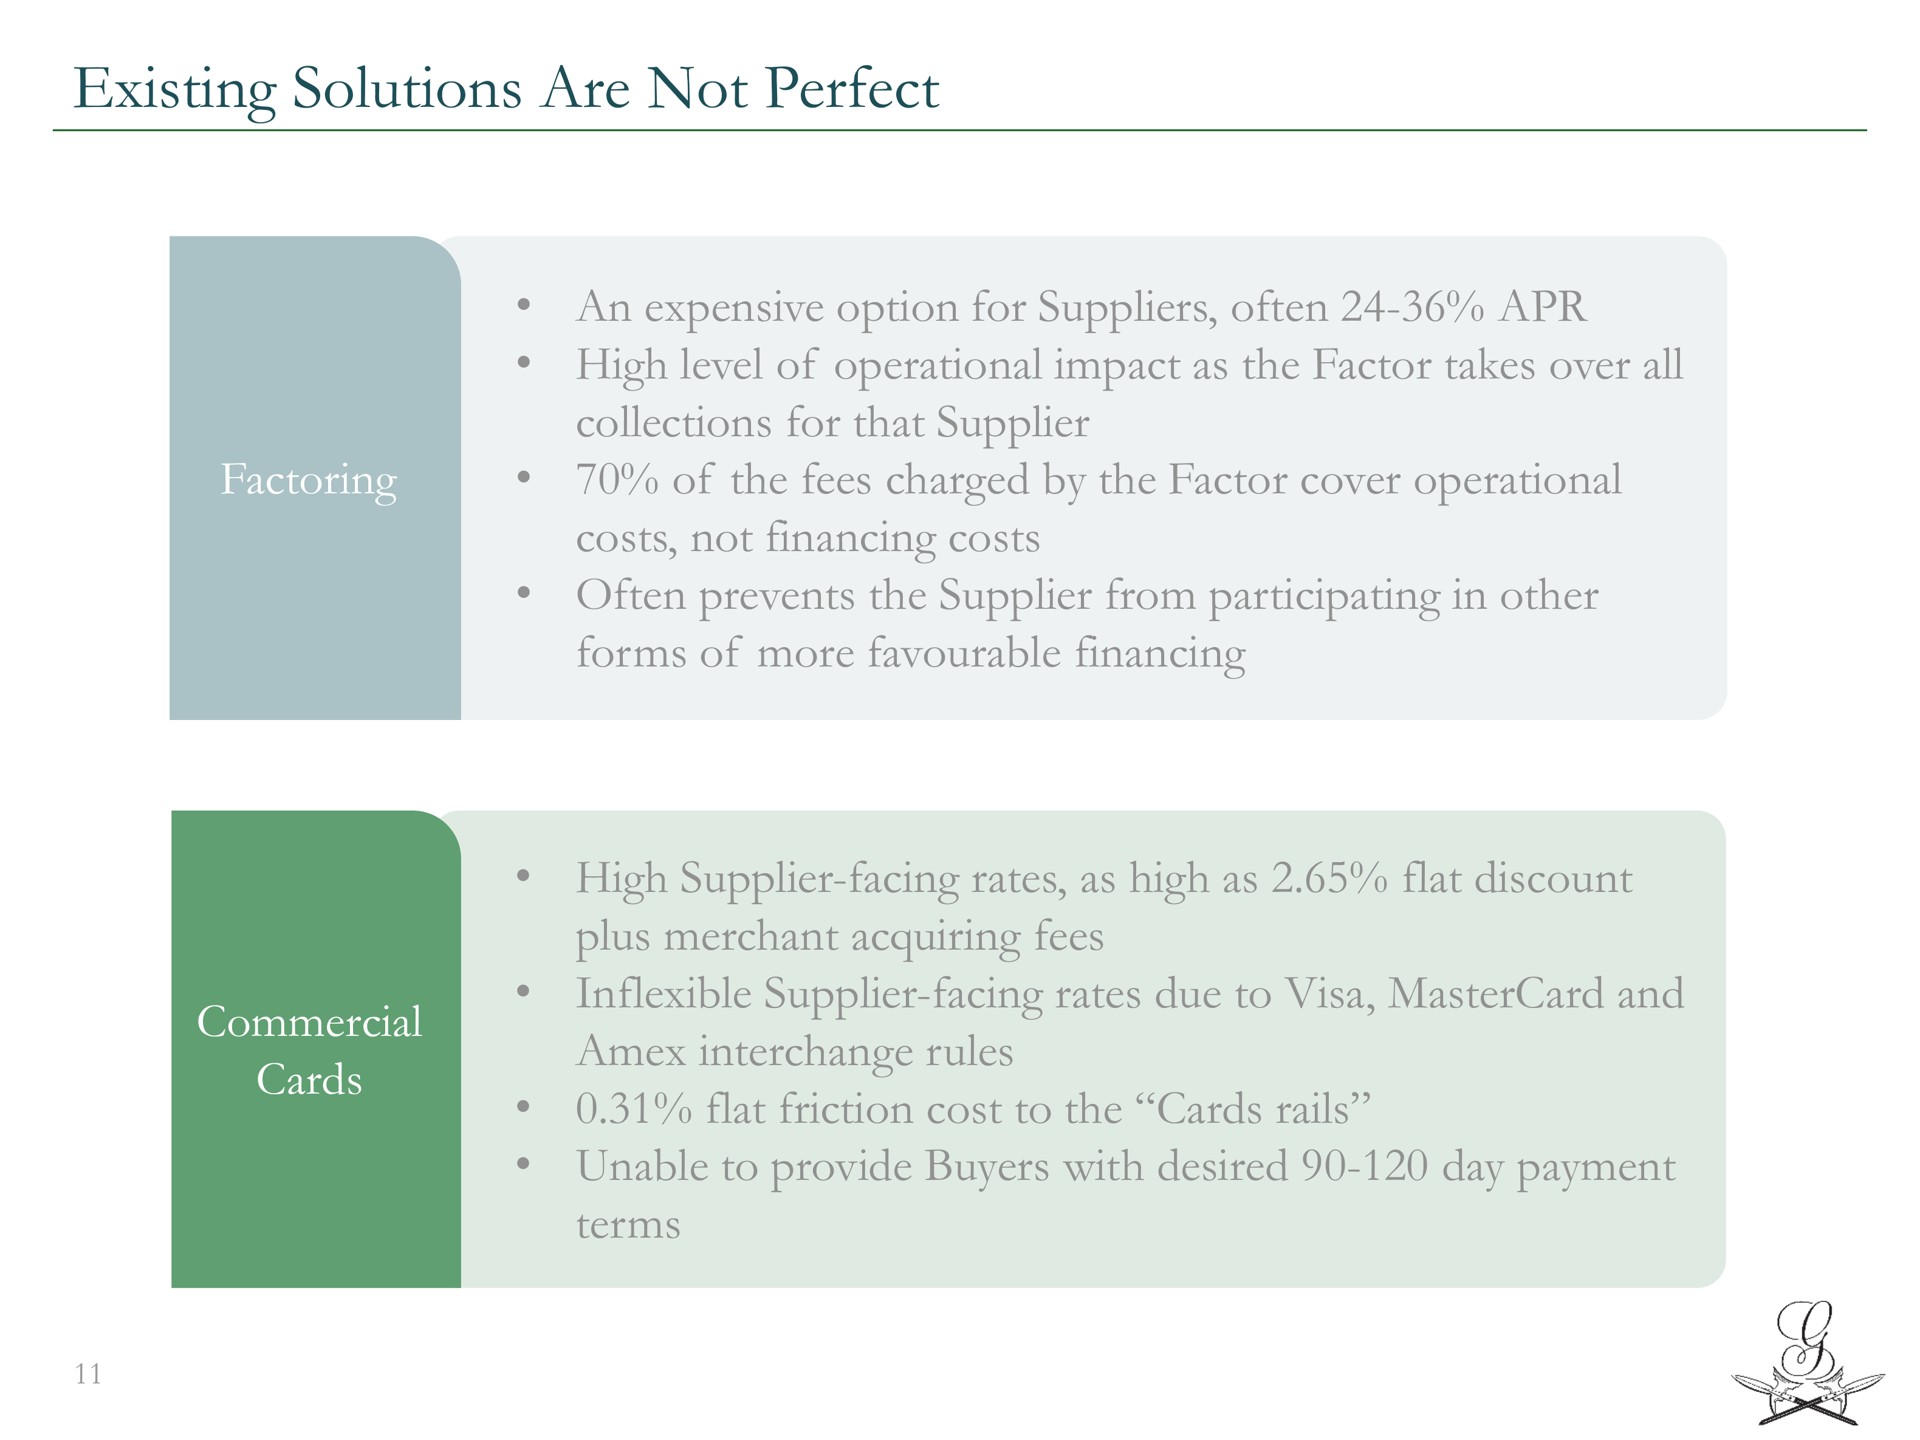 existing solutions are not perfect an expensive option for suppliers often high level of operational impact as the factor takes over all collections for that supplier factoring of the fees charged by the factor cover operational costs not financing costs often prevents the supplier from participating in other forms of more financing commercial cards high supplier facing rates as high as flat discount plus merchant acquiring fees inflexible supplier facing rates due to visa and interchange rules flat friction cost to the cards rails unable to provide buyers with desired day payment terms | Greensill Capital